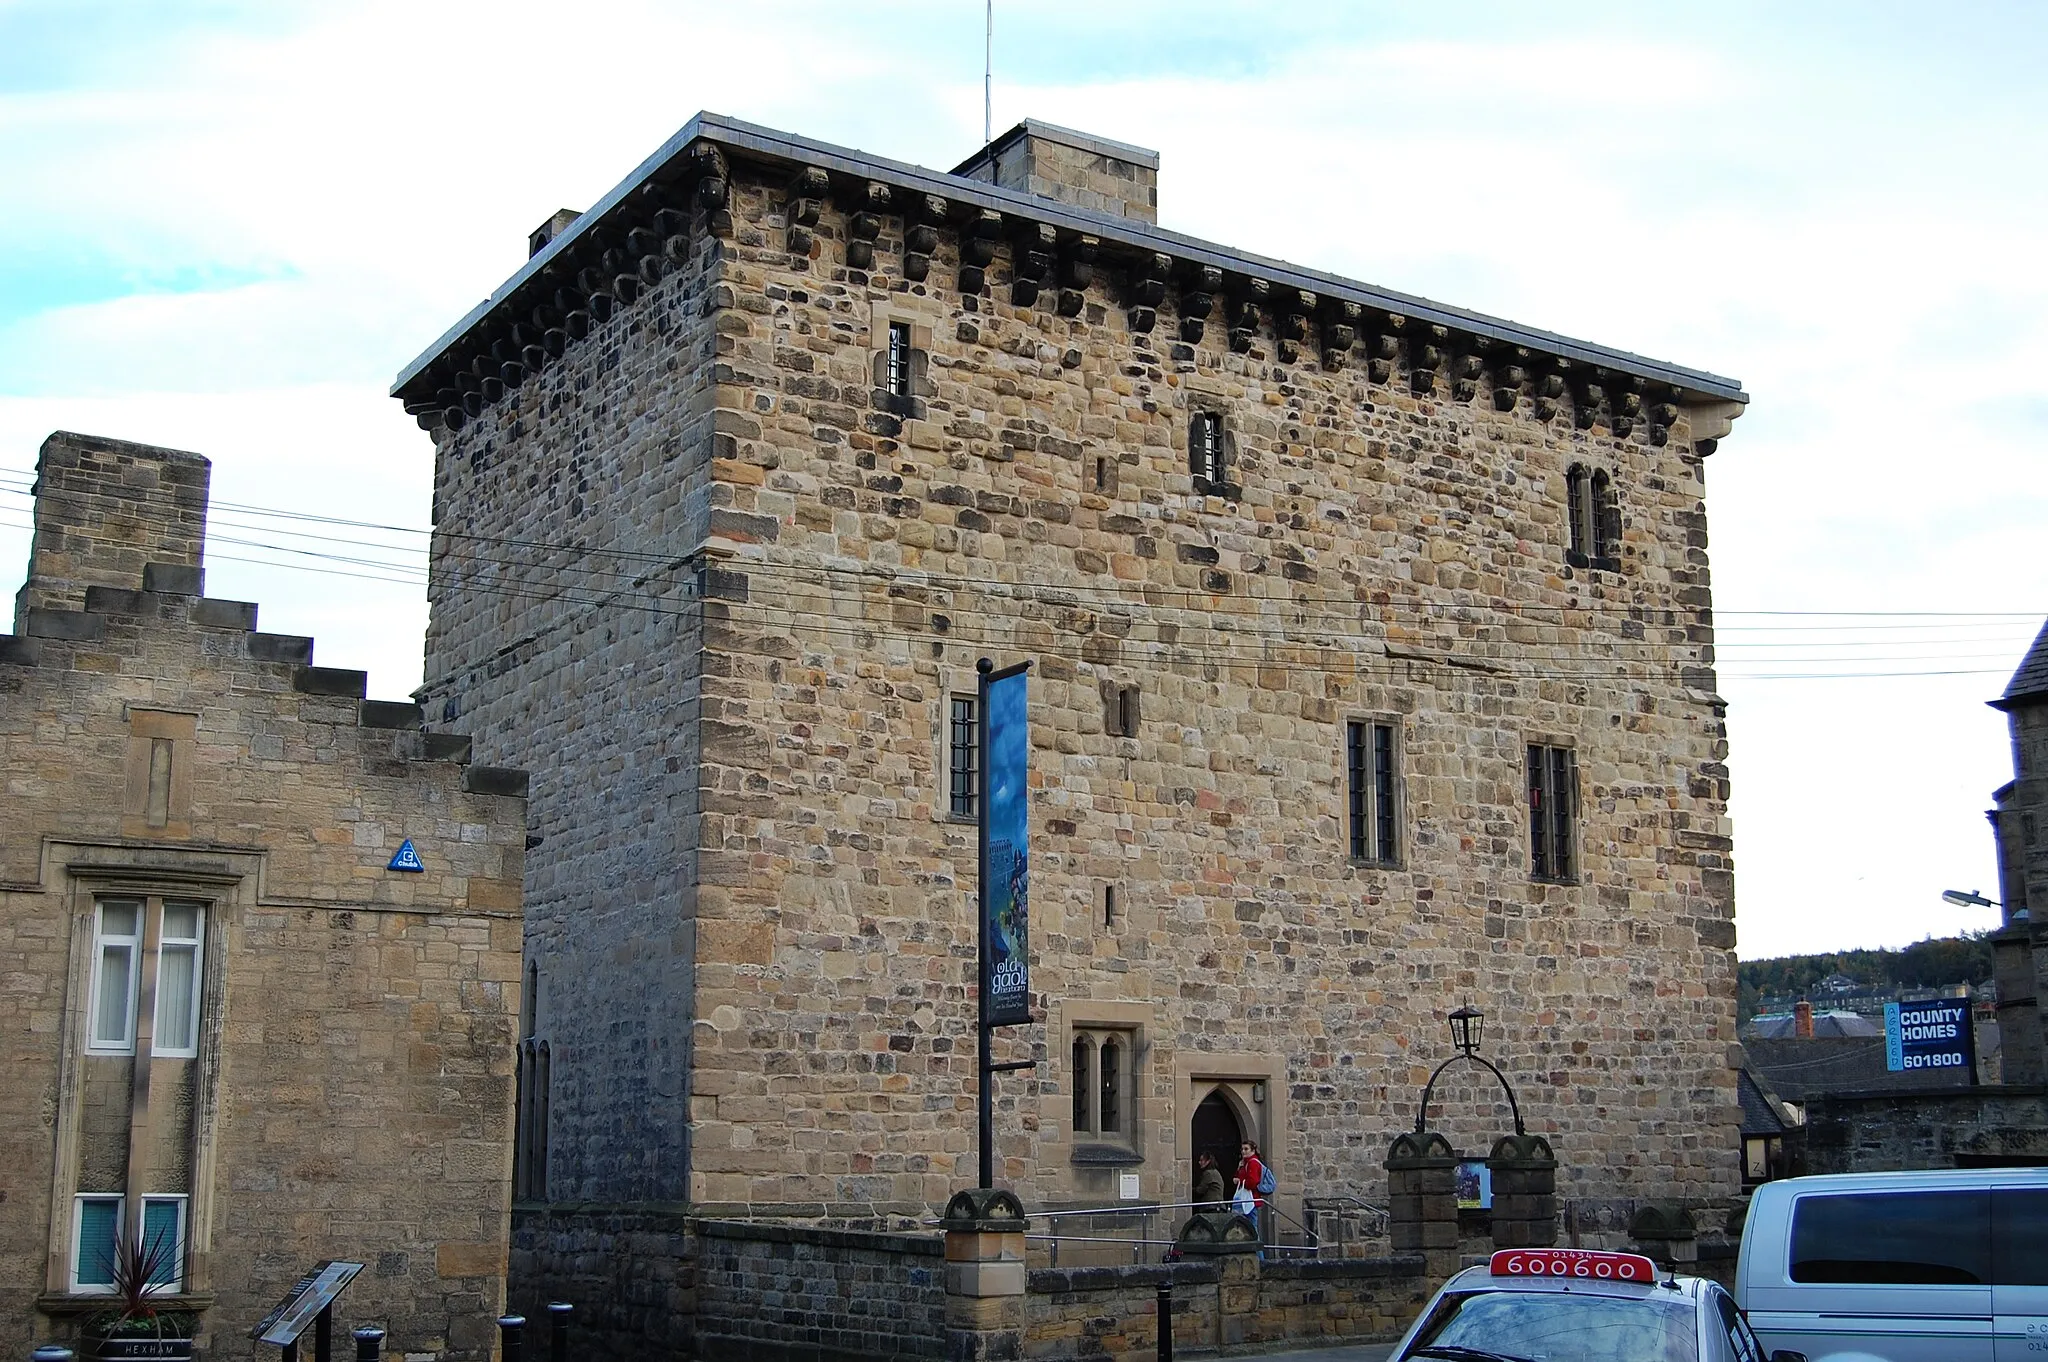 Photo showing: Hexham Gaol, said to be the oldest purpose-built prison in the United Kingdom. It's currently a prison museum.